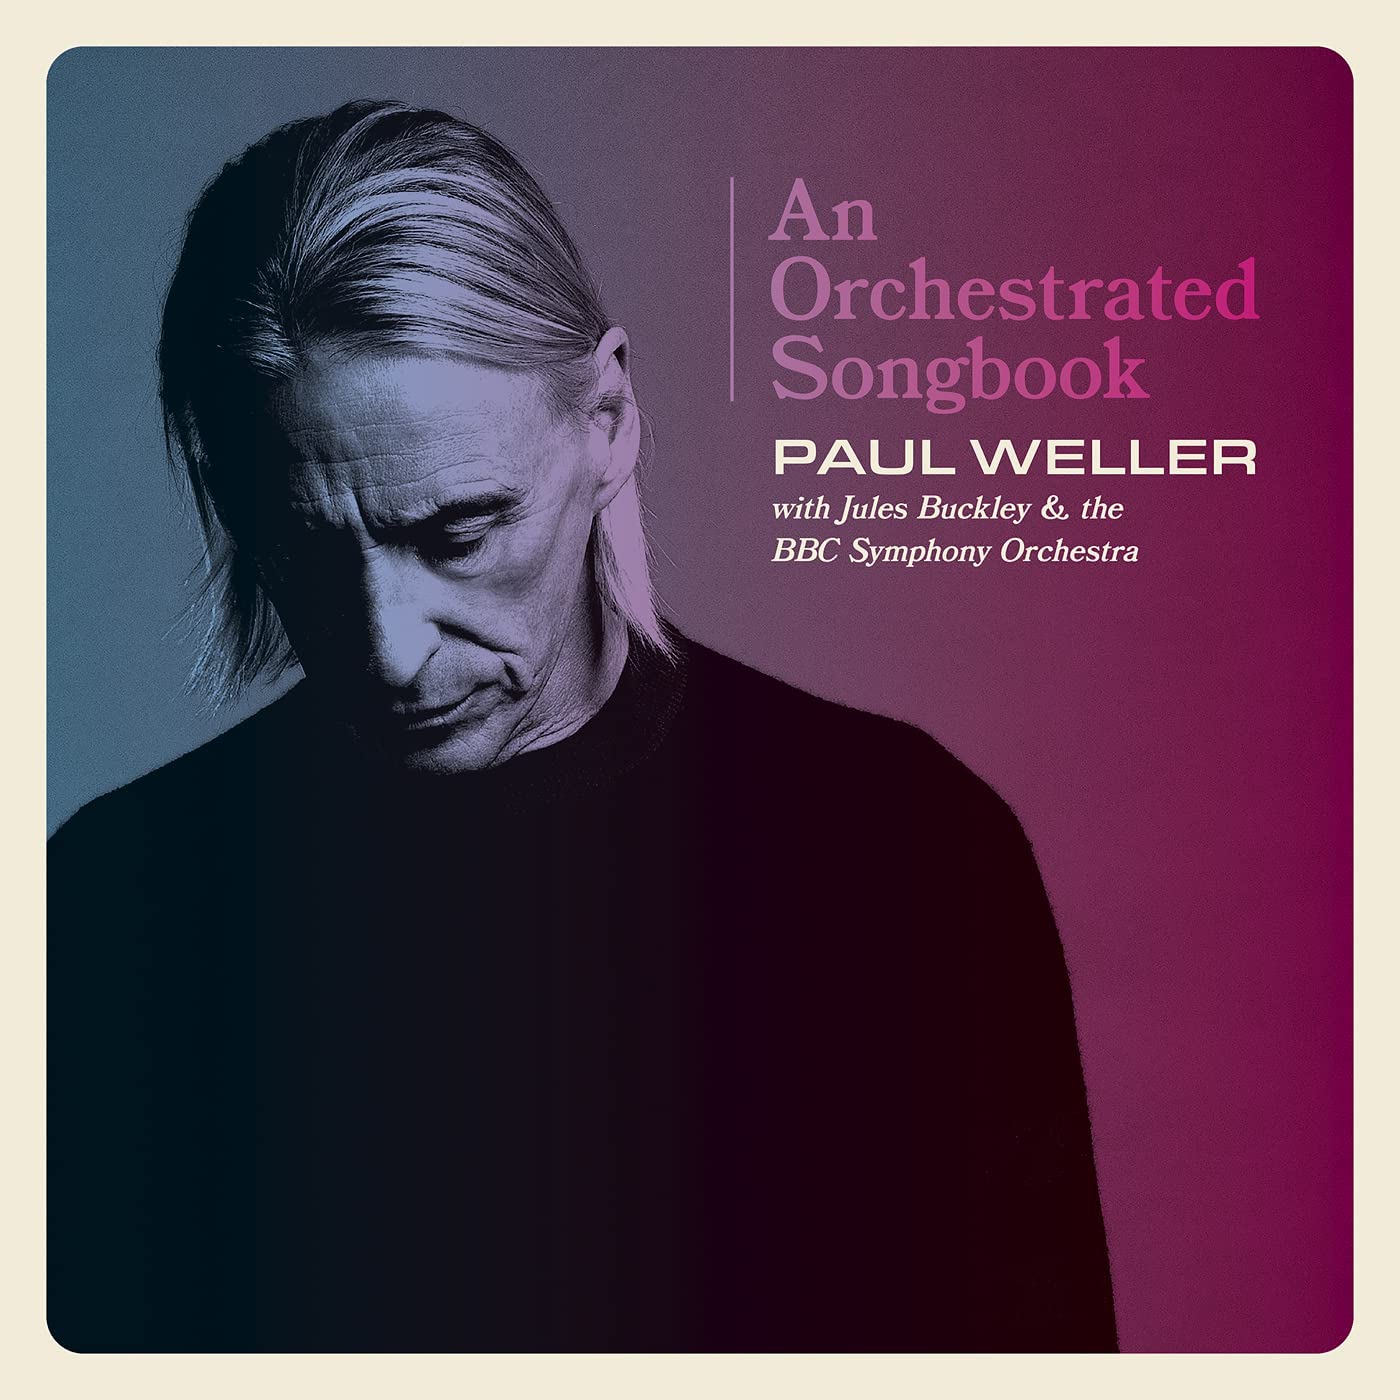 Paul Weller + The BBC Symphony Orchestra – An Orchestrated Songbook - 2 x VINYL LP SET